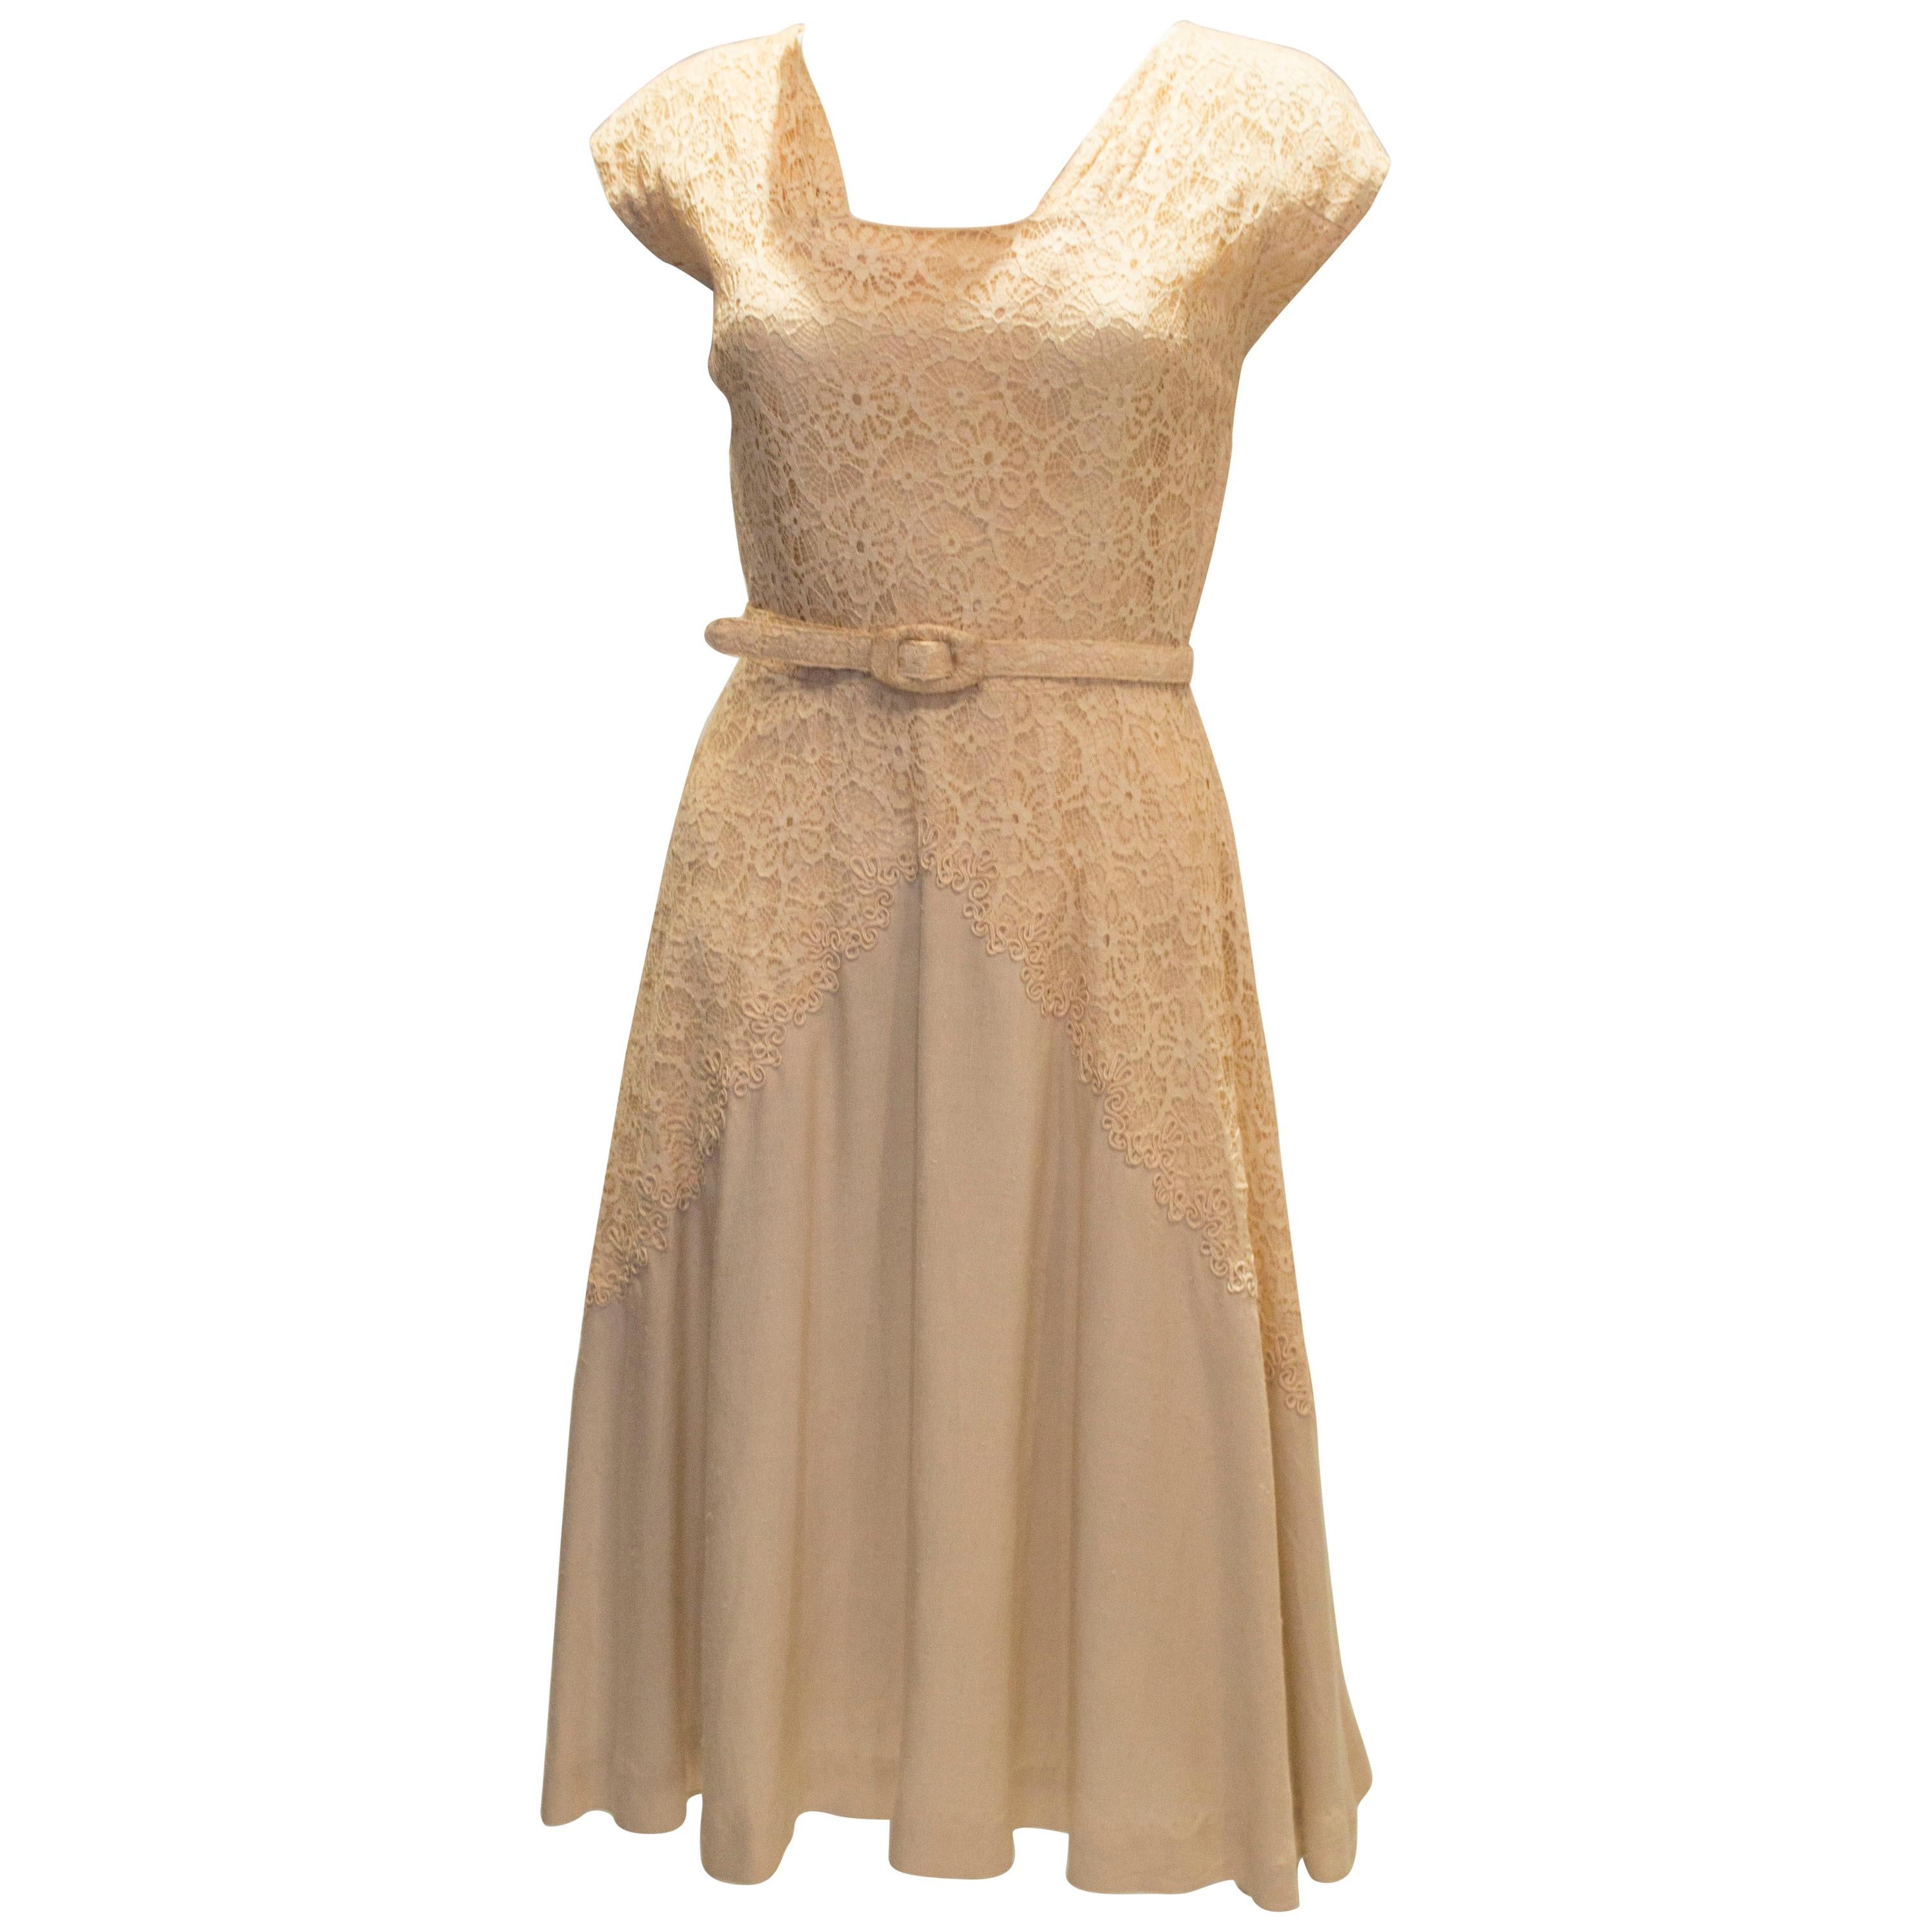 Vintage Ivory and Lace Dress by Well Made London. For Sale